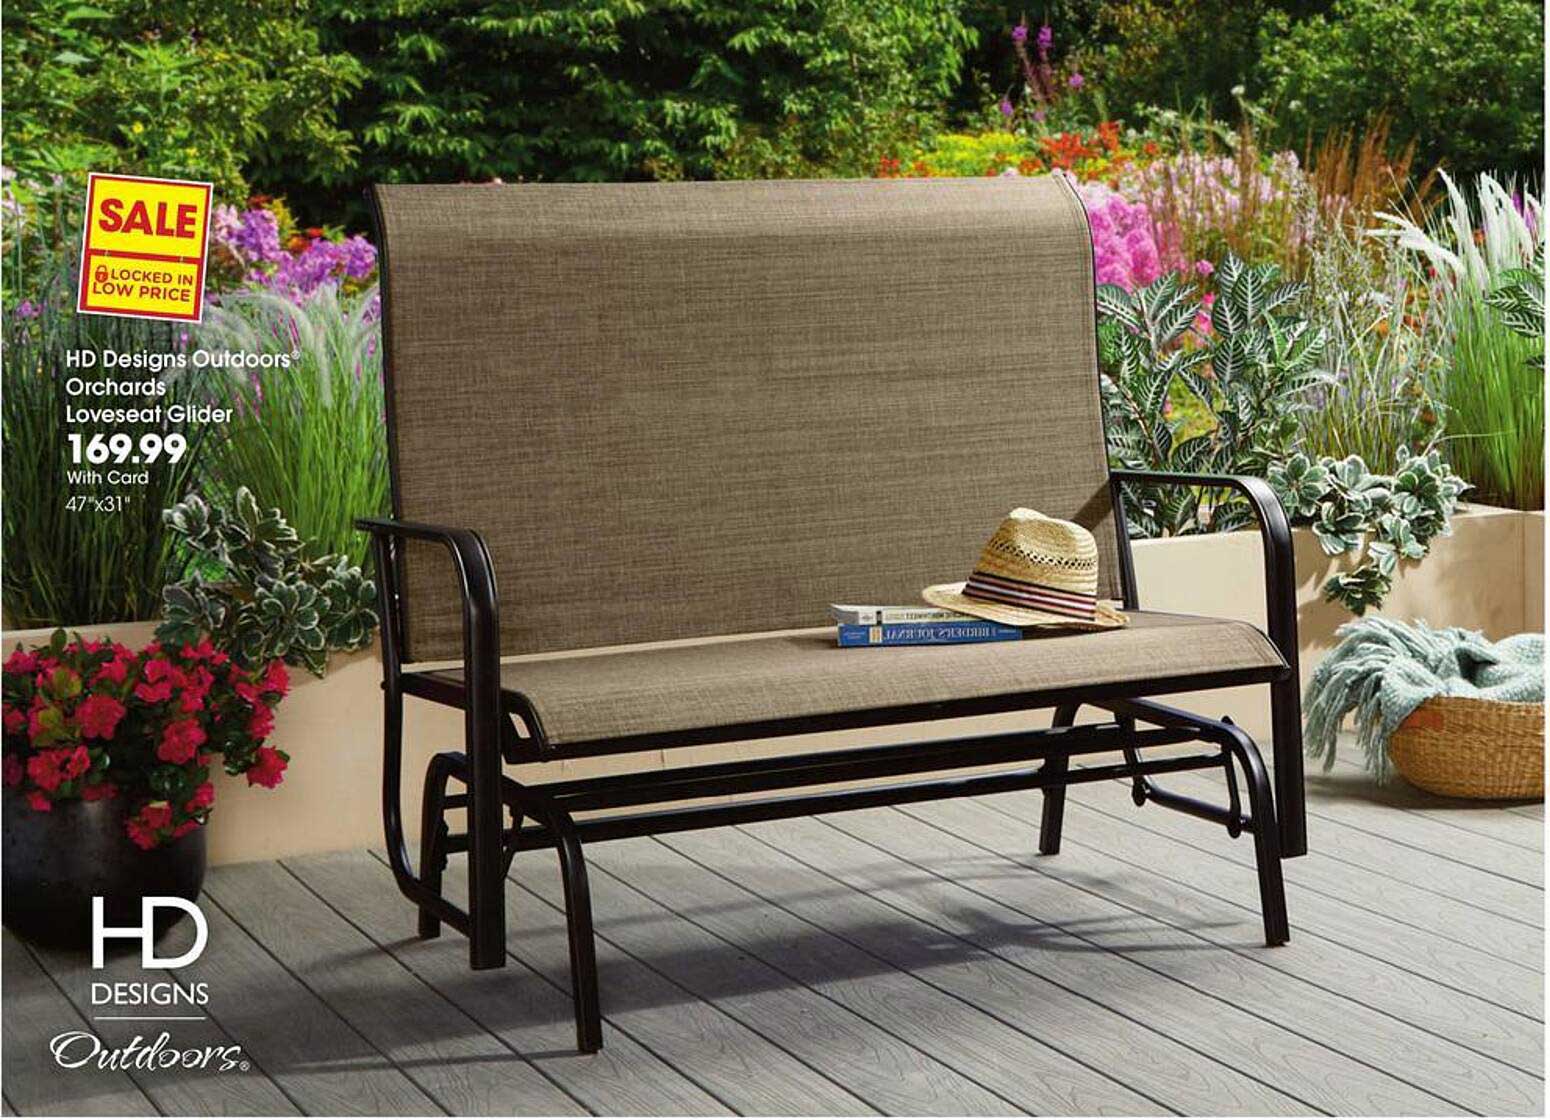 King Soopers Hd Designs Outdoors Orchards Loveseat Glider